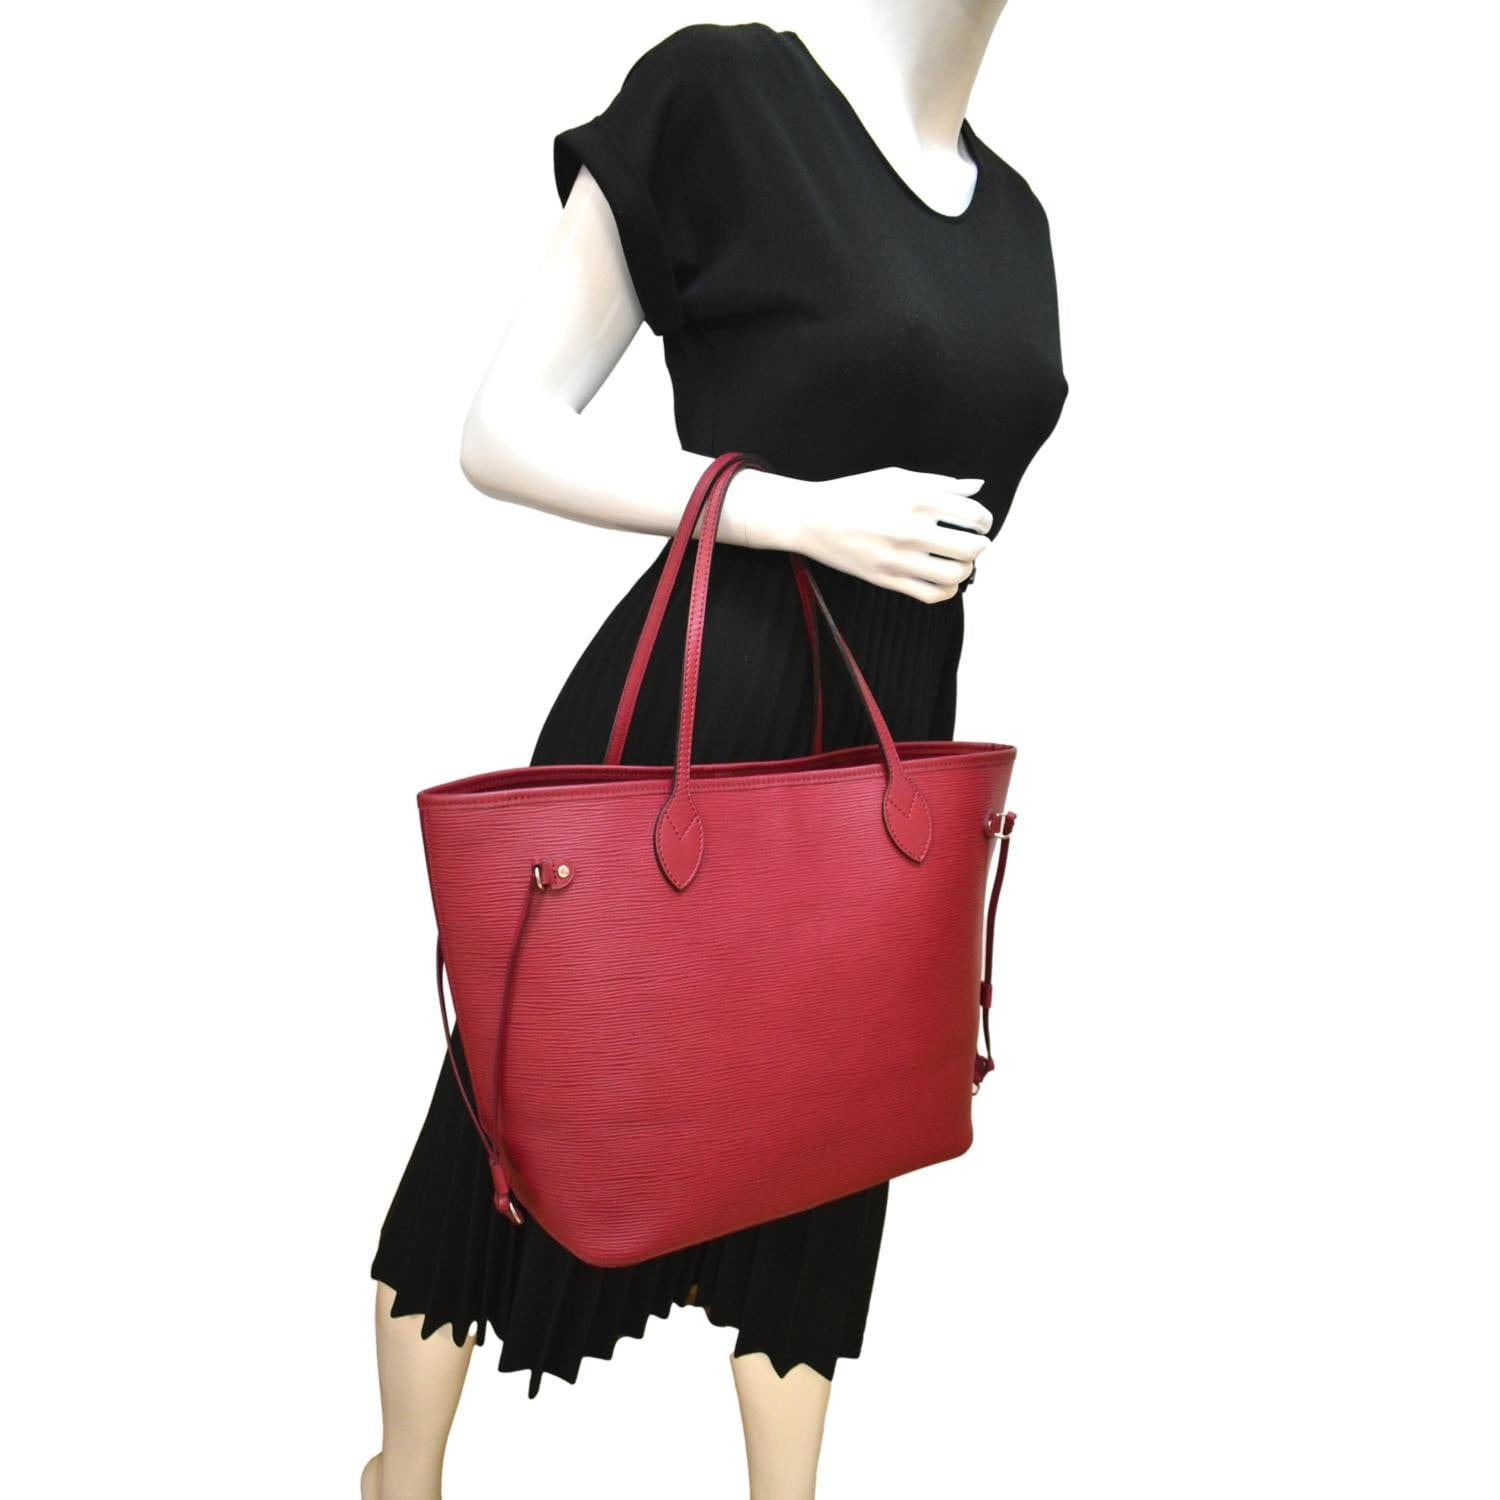 LEATHER AND VODKA NEVERFULL MM WINE BAG WITH BRAIDED STRAPS